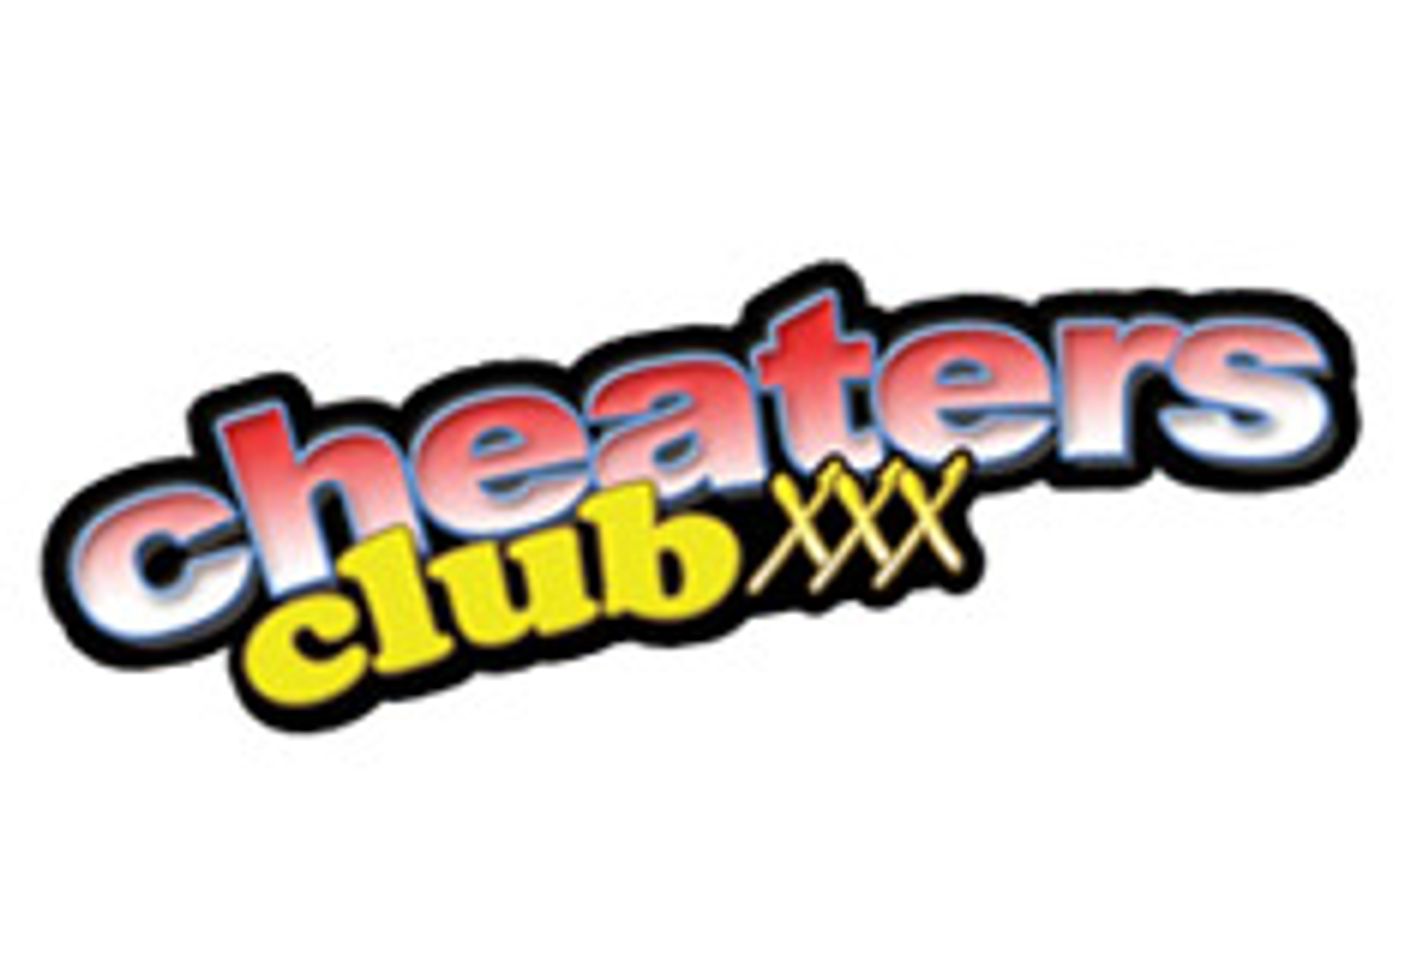 Cheaters Club XXX Drops Two Titles